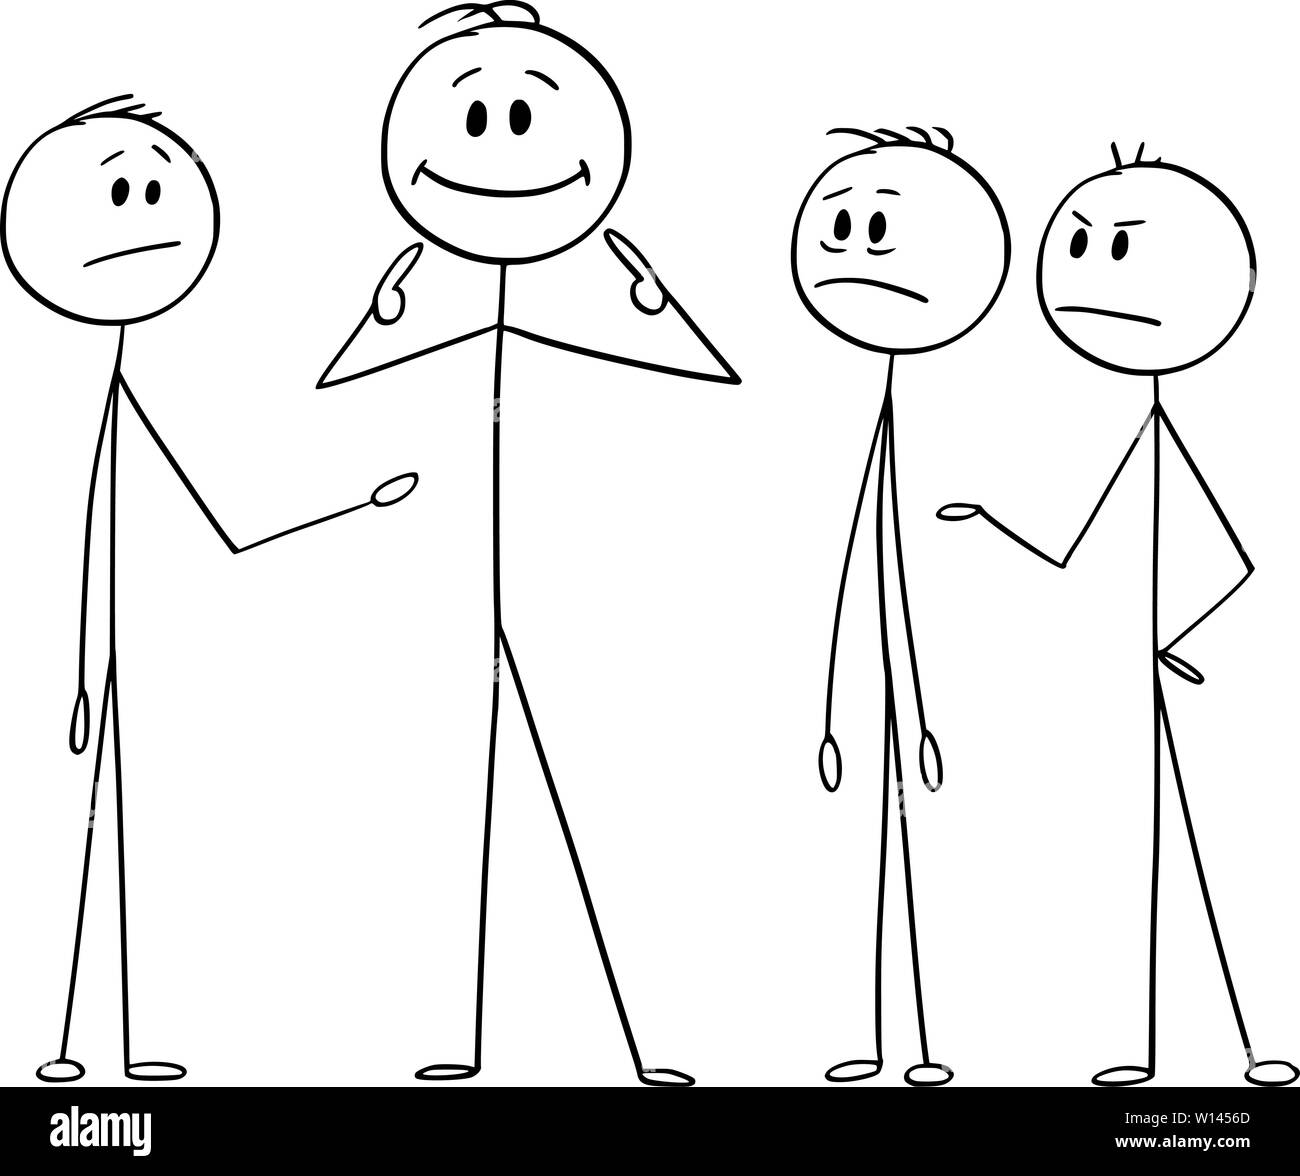 Vector cartoon stick figure drawing conceptual illustration of man or businessman pointing on yourself as the best part of the team. Business concept of arrogance, individuality and egoism. Stock Vector